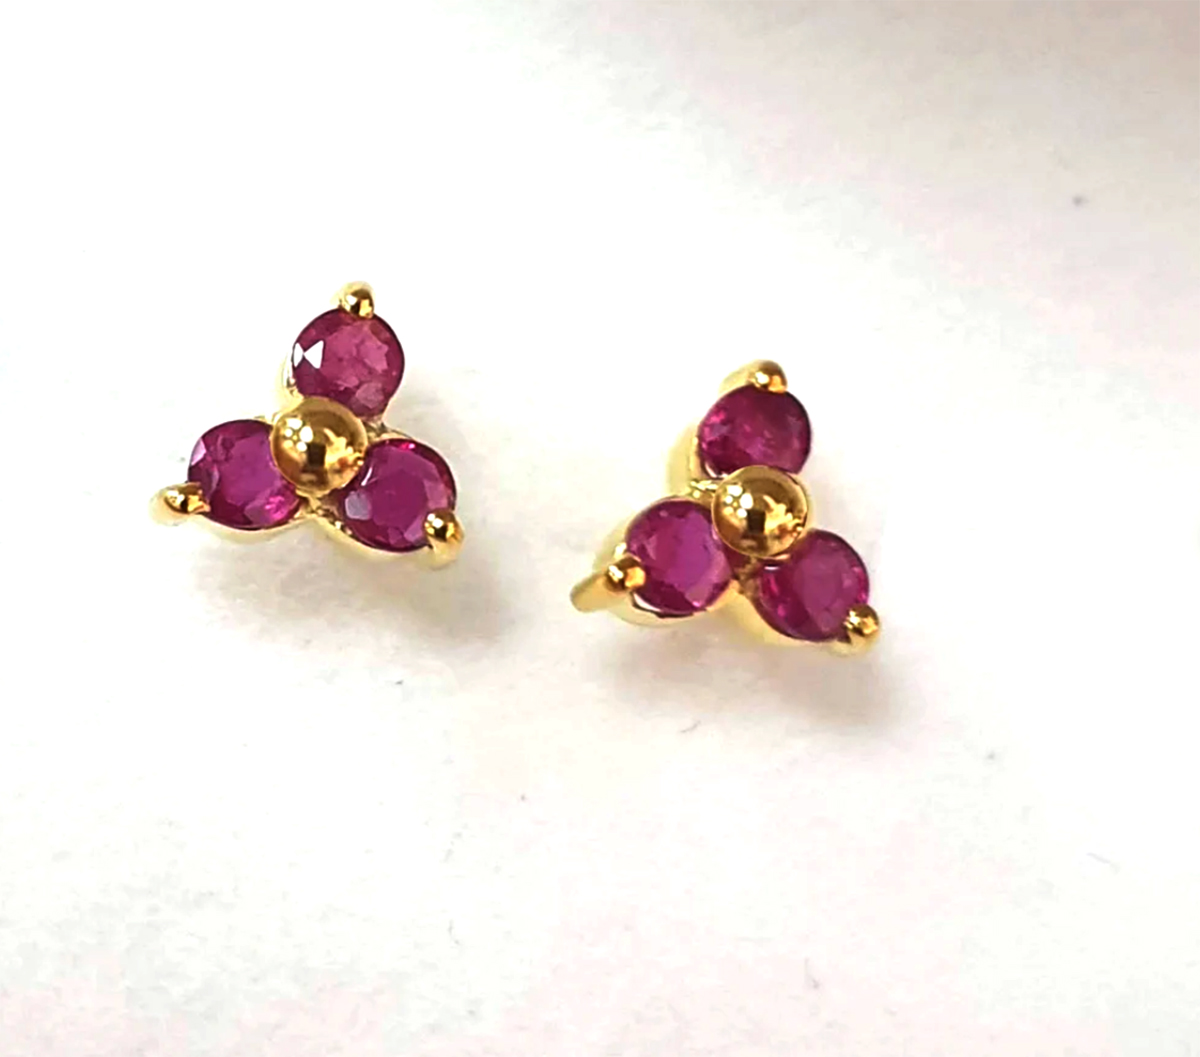 Natural Siam Red Ruby Earrings, Sterling Silver, Studs Earring, July Birthstone, Handmade Engagement Gift For Women Her, Thailand Jewelry